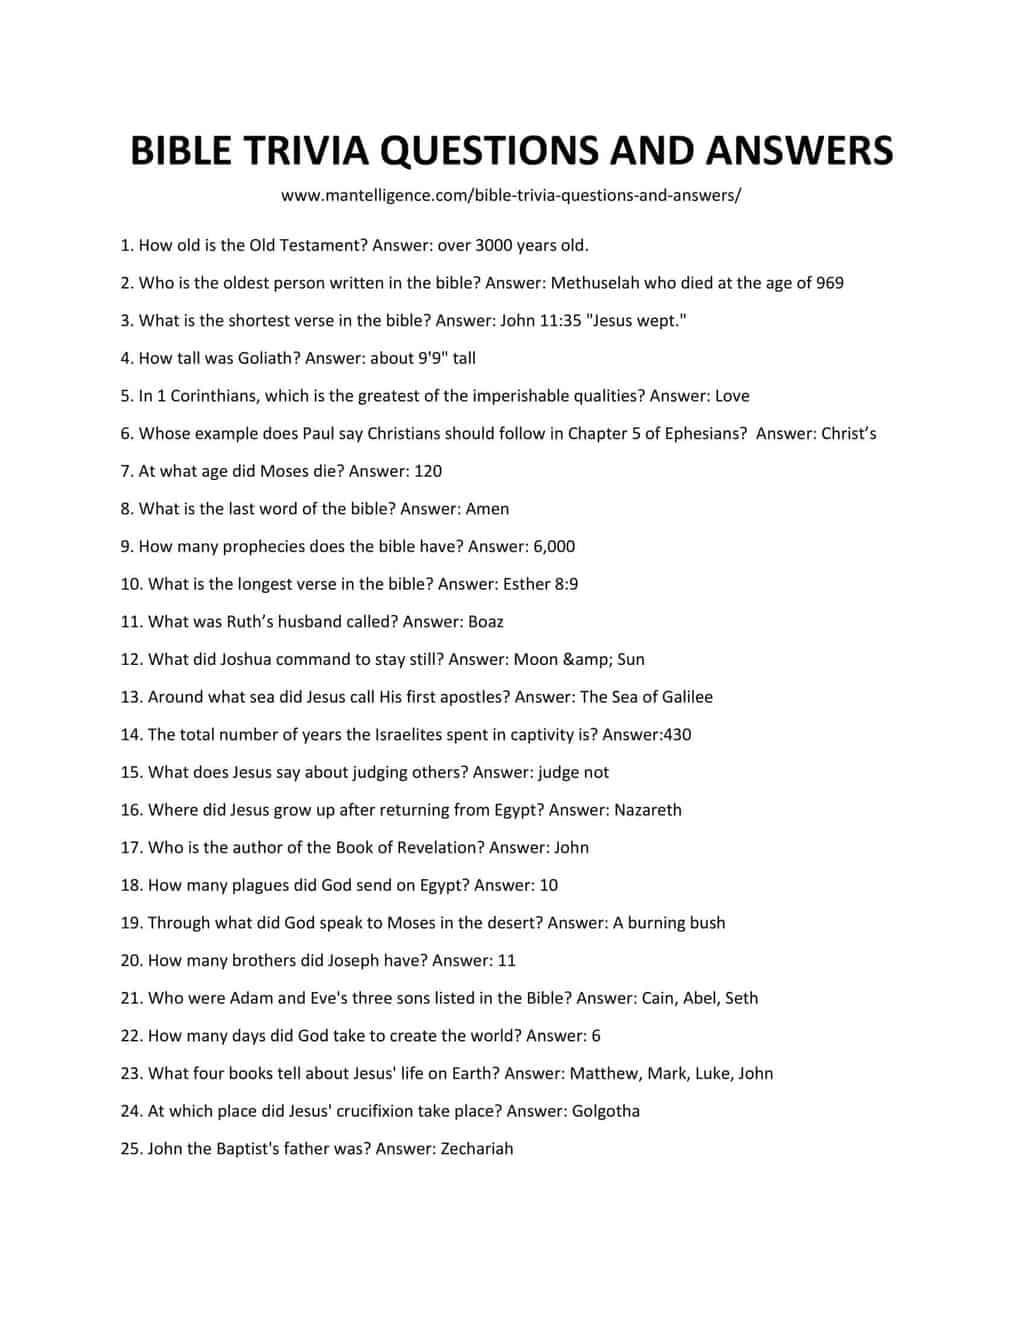 Hard Bible Trivia Questions And Answers Multiple Choice Draw flatulence